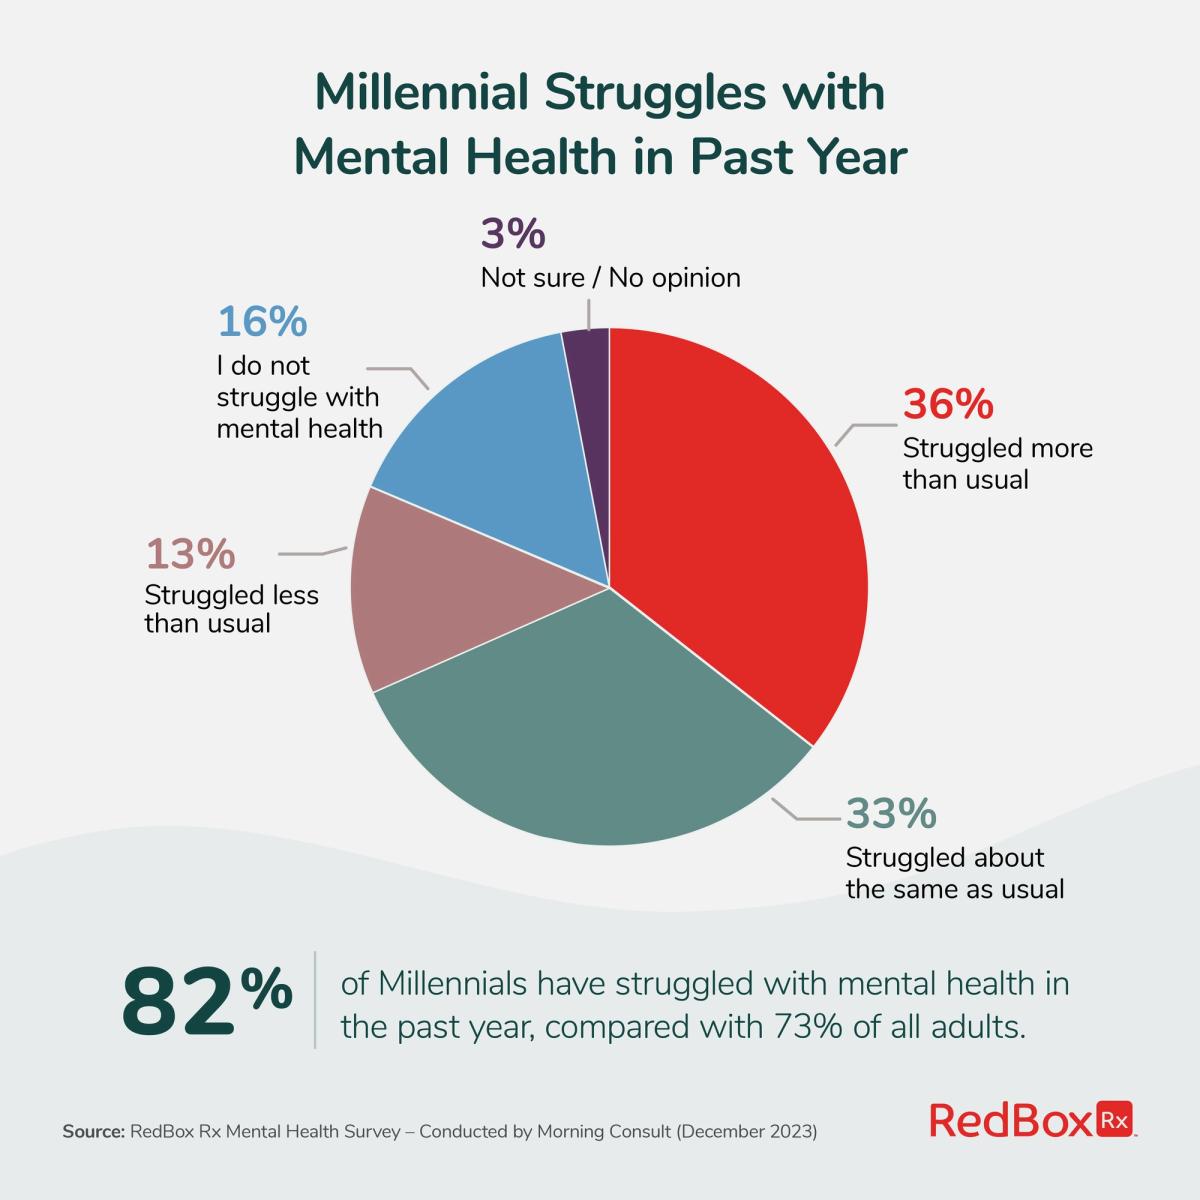 82% of Millennials Have Struggled with Mental Health in the Past Year, Compared with 73% of All Adults